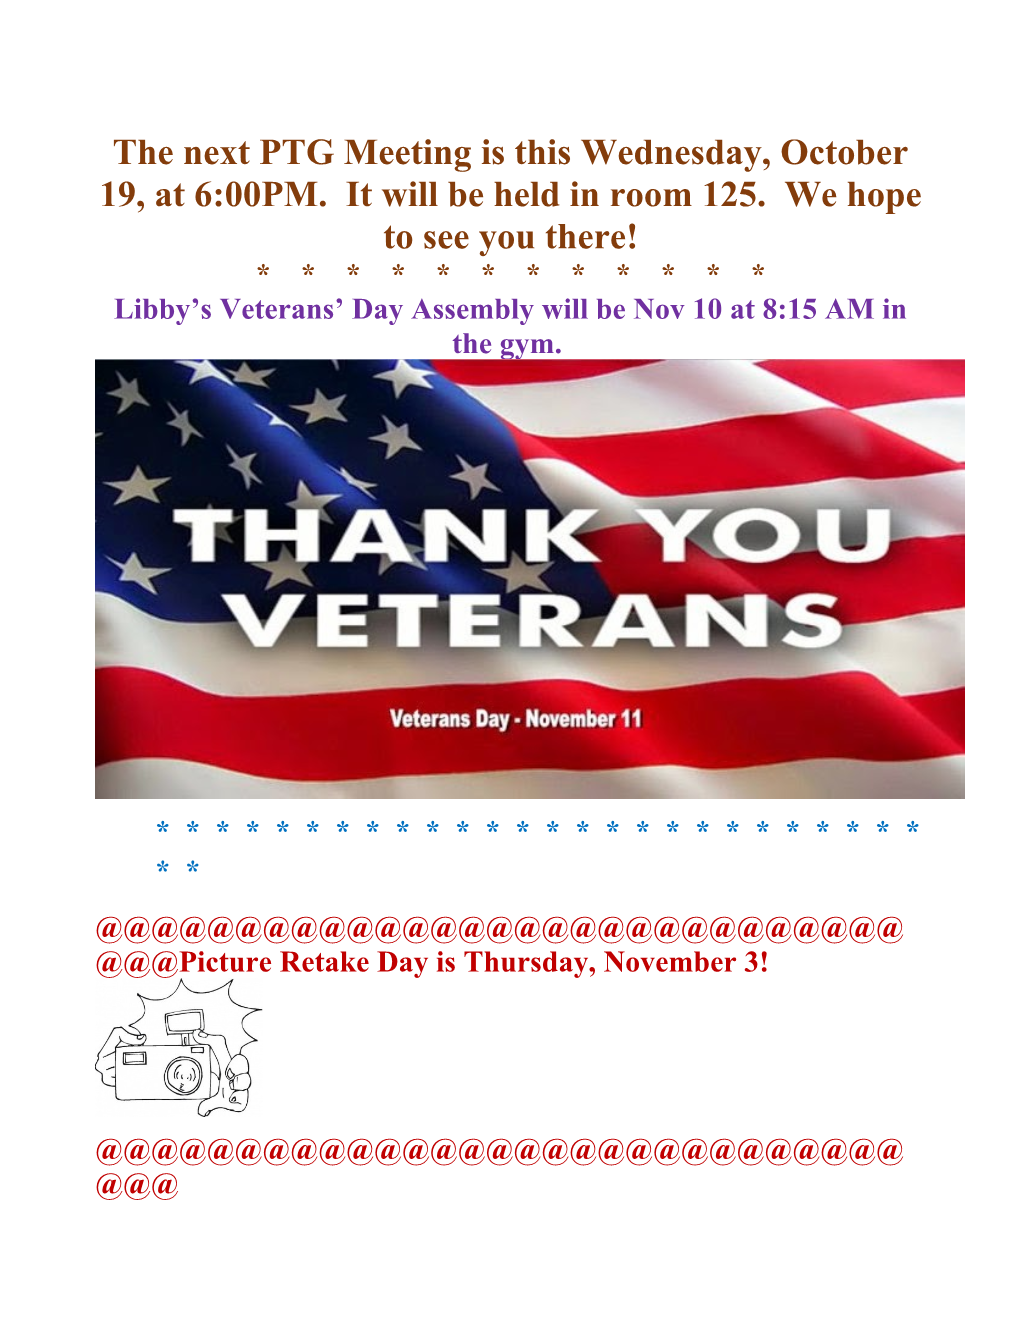 Libby S Veterans Day Assembly Will Be Nov 10 at 8:15 AM in the Gym